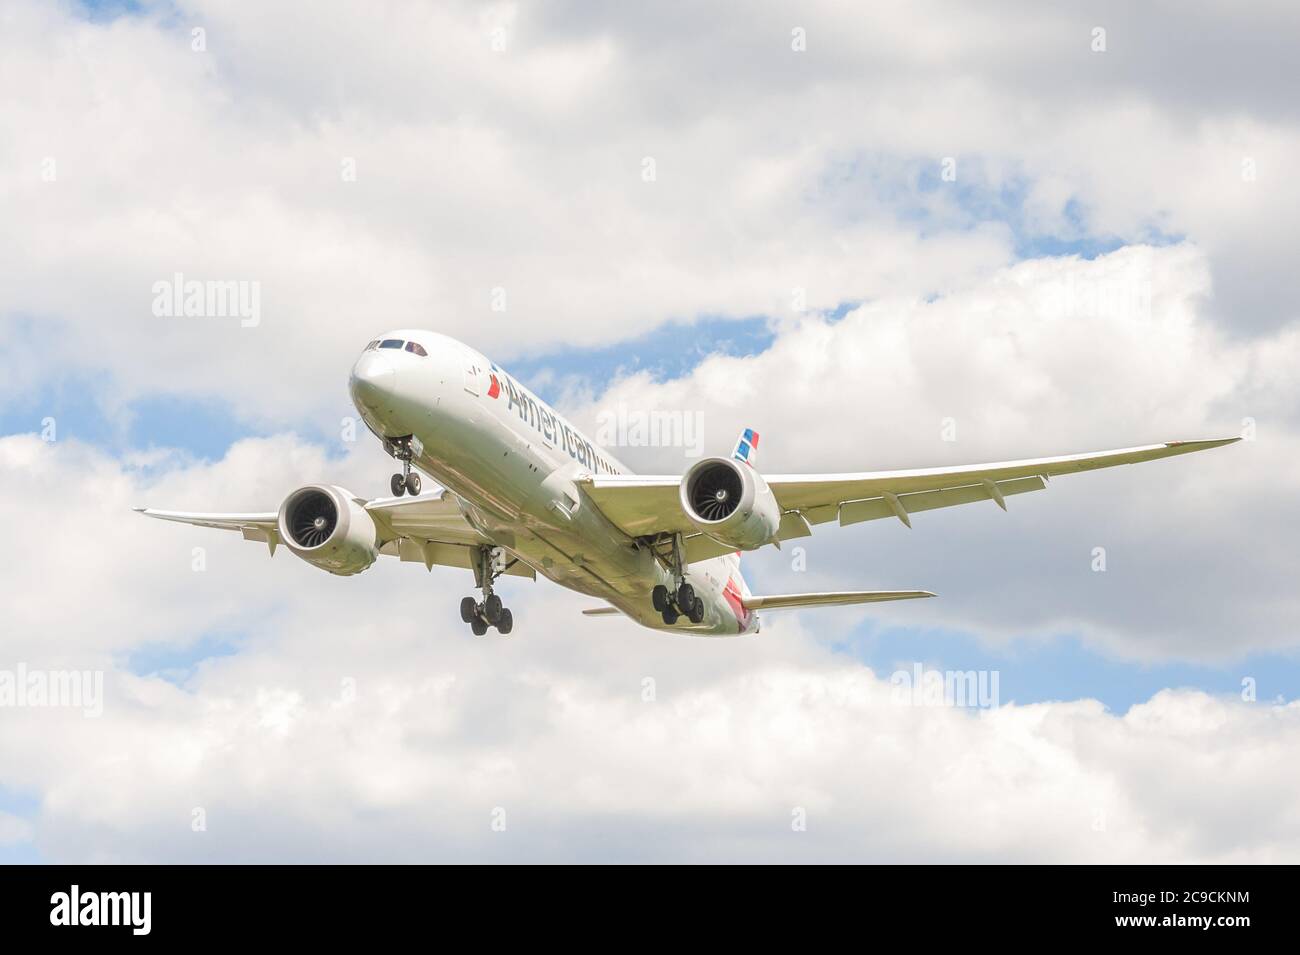 American Airlines Boeing 787 Dreamliner on landing approach to London, Heathrow Airport, UK on May 12, 2019 Stock Photo